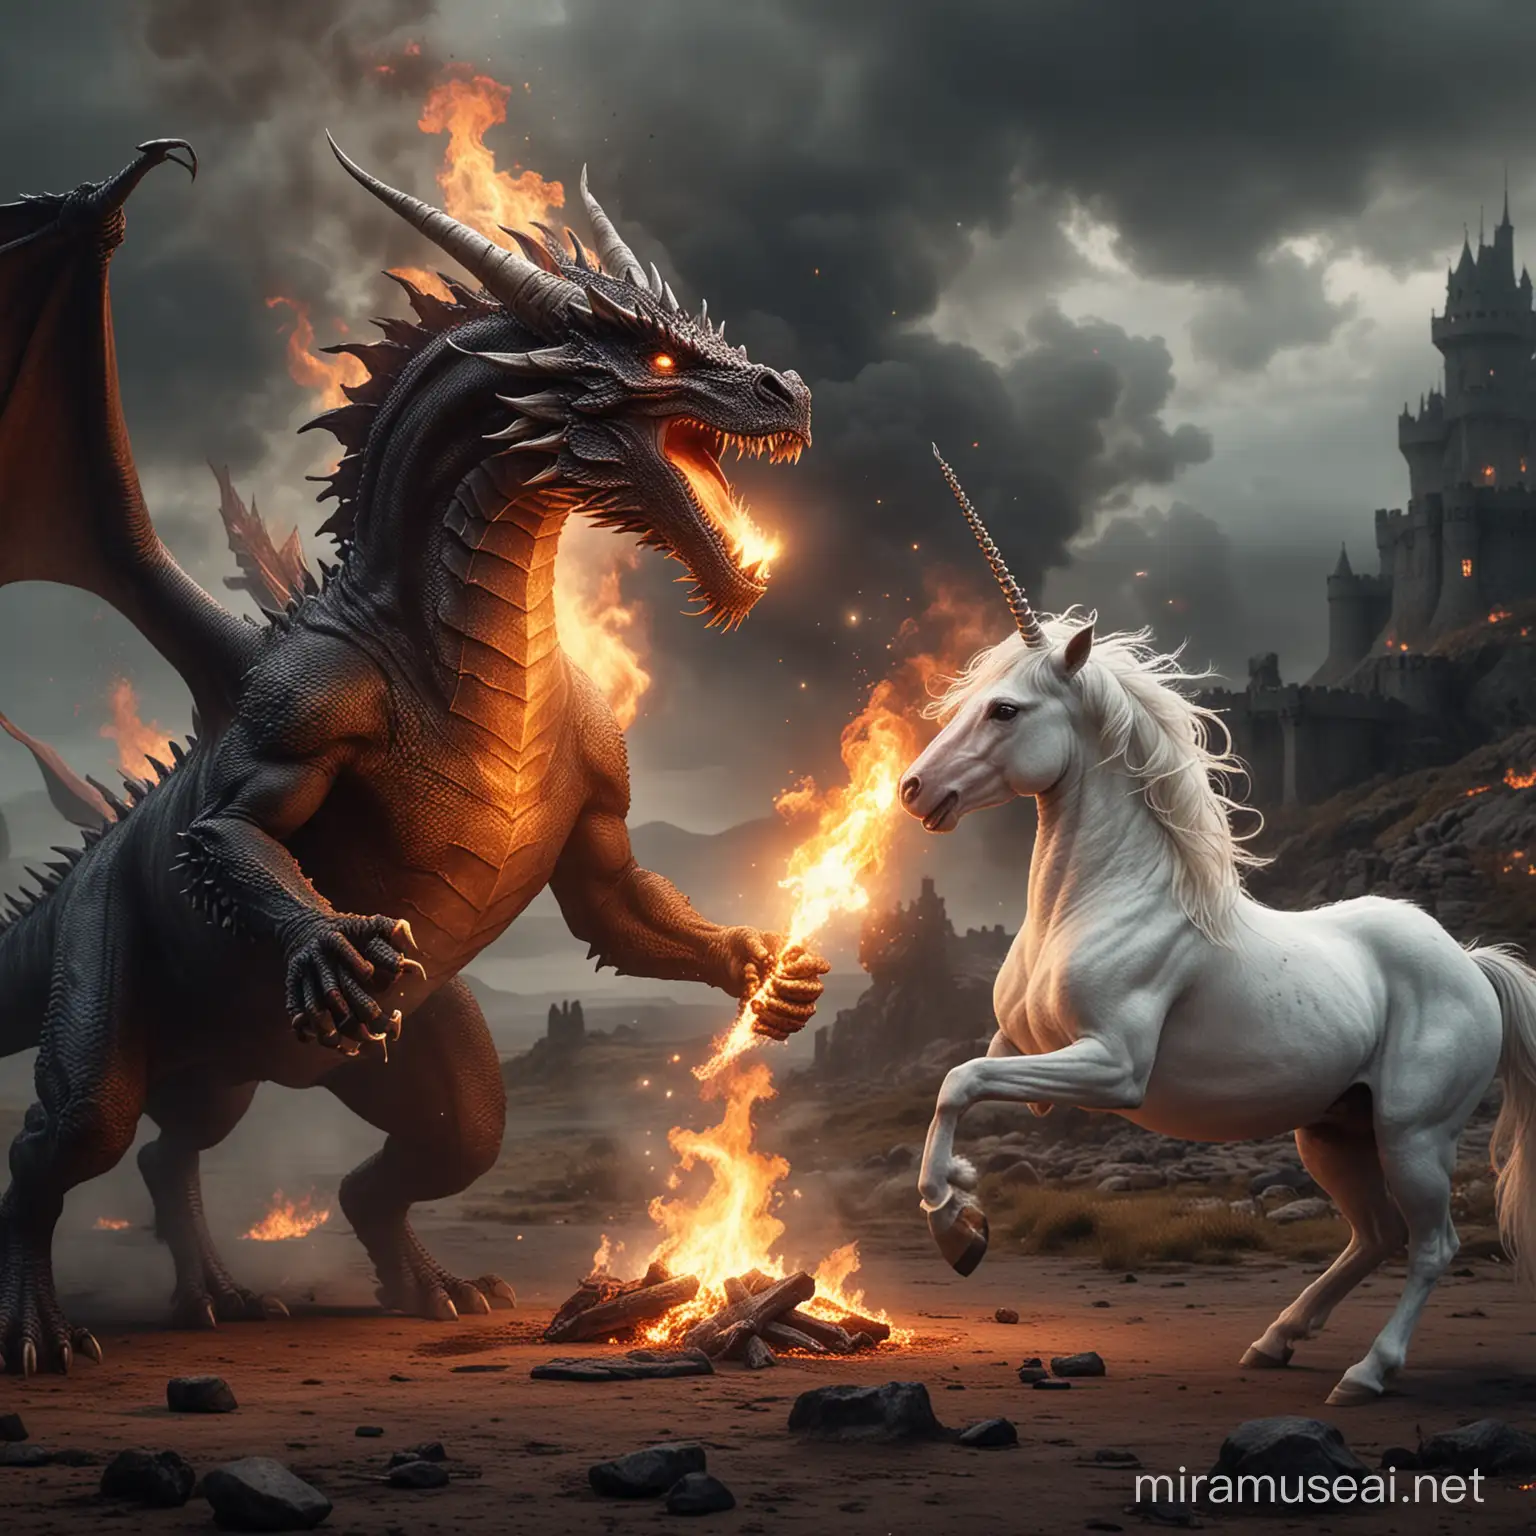 Photo realistic scene of an Evil Dragon fighting a cute Unicorn with fire breathing. Game of thrones style in a unfriendly landscape